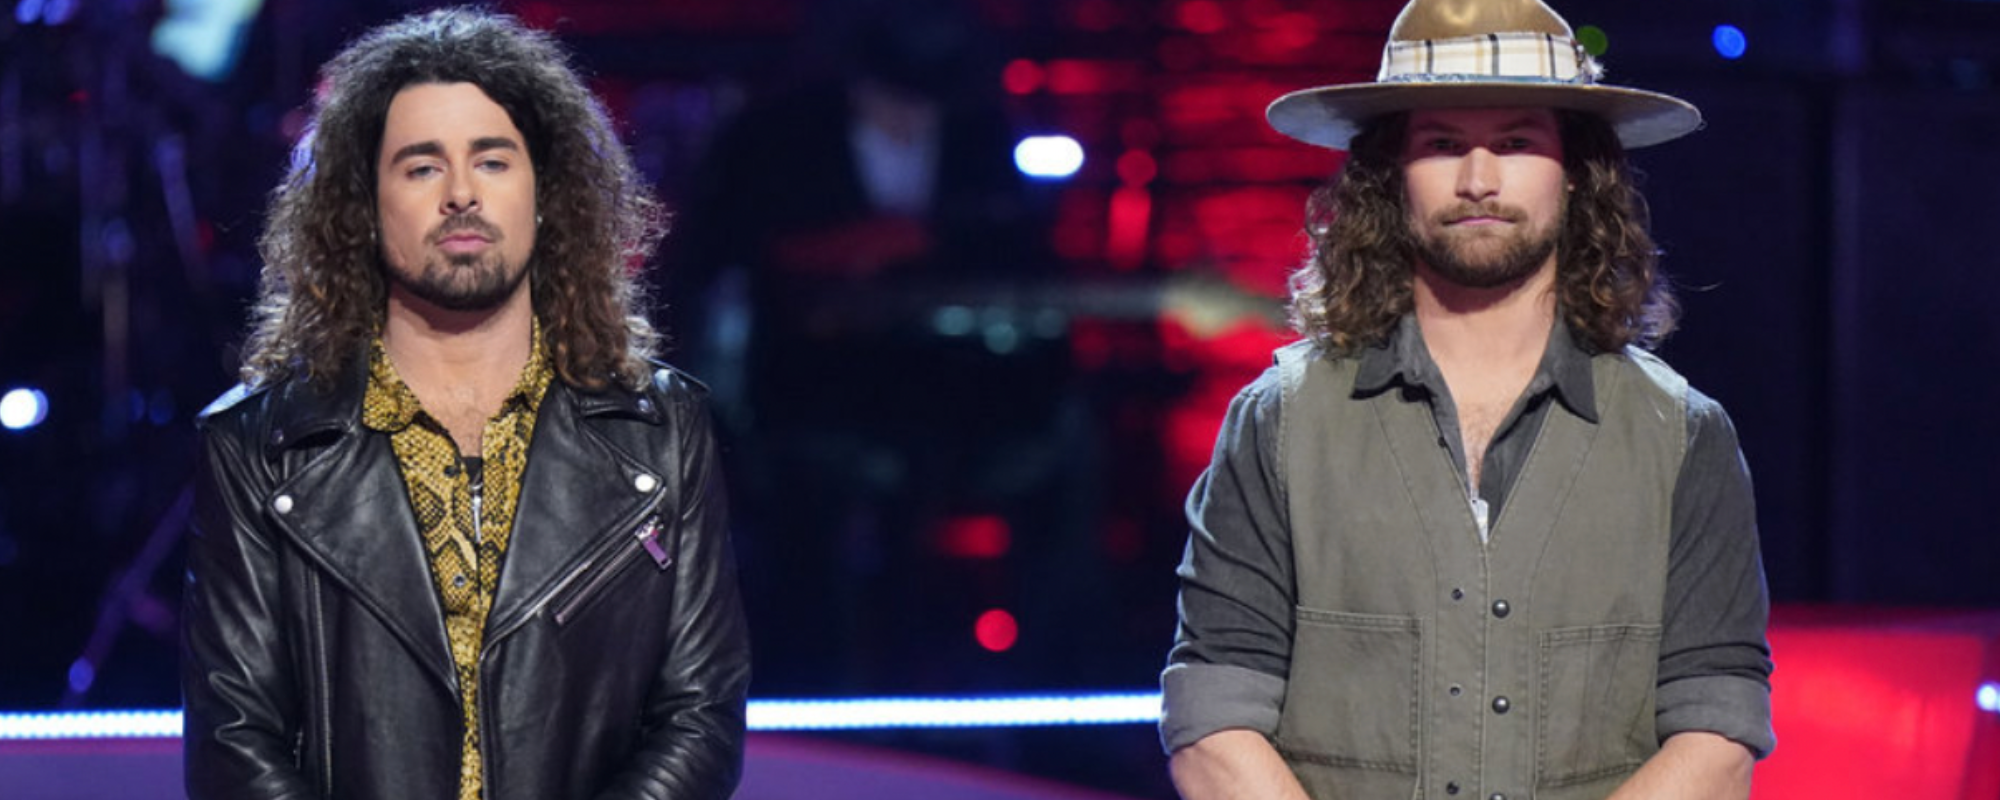 Kason Lester Battles Walker Wilson with “Here Without You” on ‘The Voice’